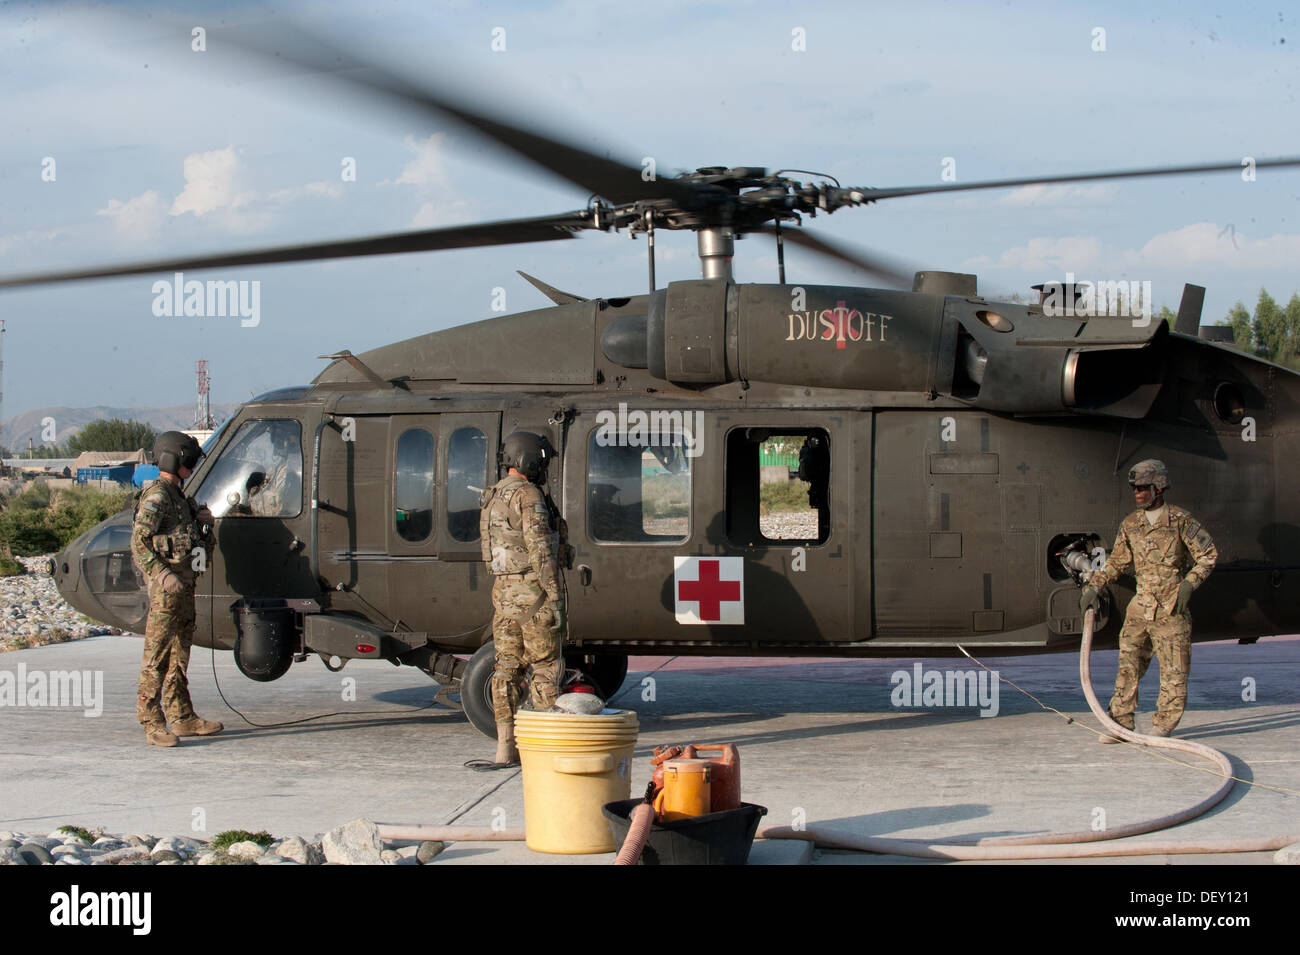 U.S. Army soldiers with the Medevac Platoon 'Dustoff,' Company C, 3rd Battalion, 238th Aviation Regiment, Task Force Dragon, refuel their crew's UH-60 Black Hawk helicopter after a hoist training exercise at Forward Operating Base Fenty, Nangarhar provinc Stock Photo